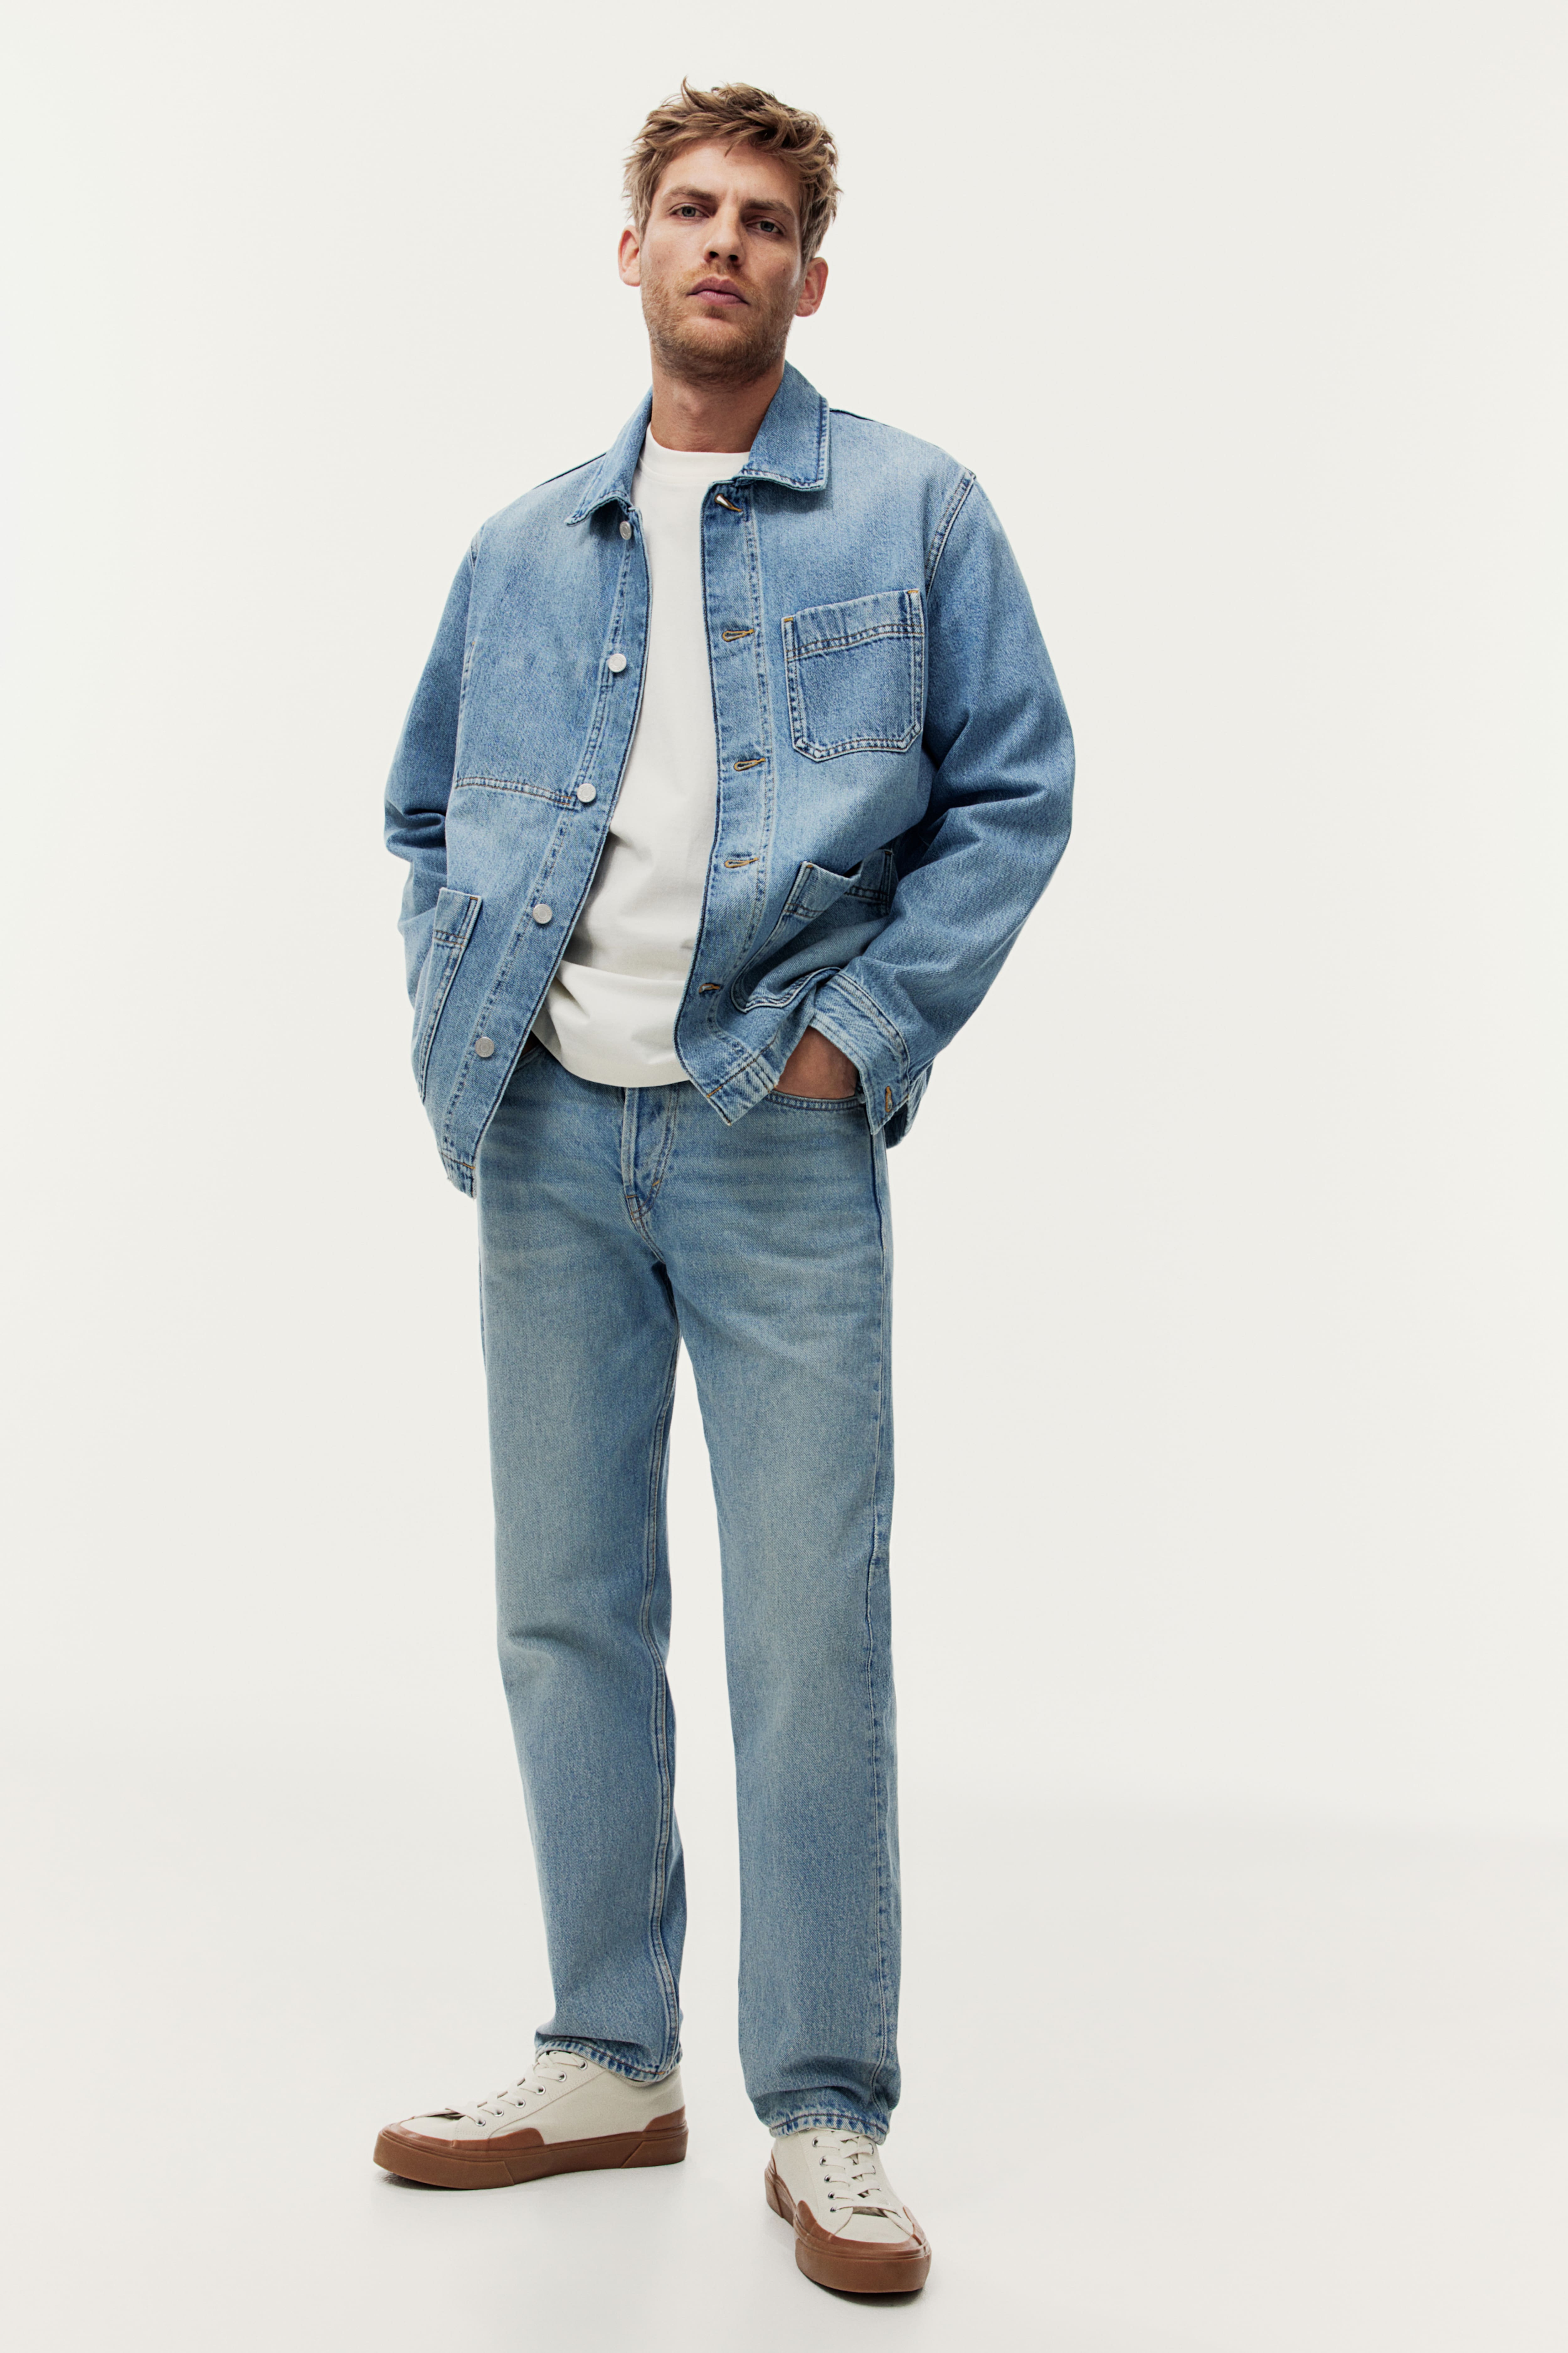 Men's New Arrivals - Trending Clothes & Styles | Lucky Brand